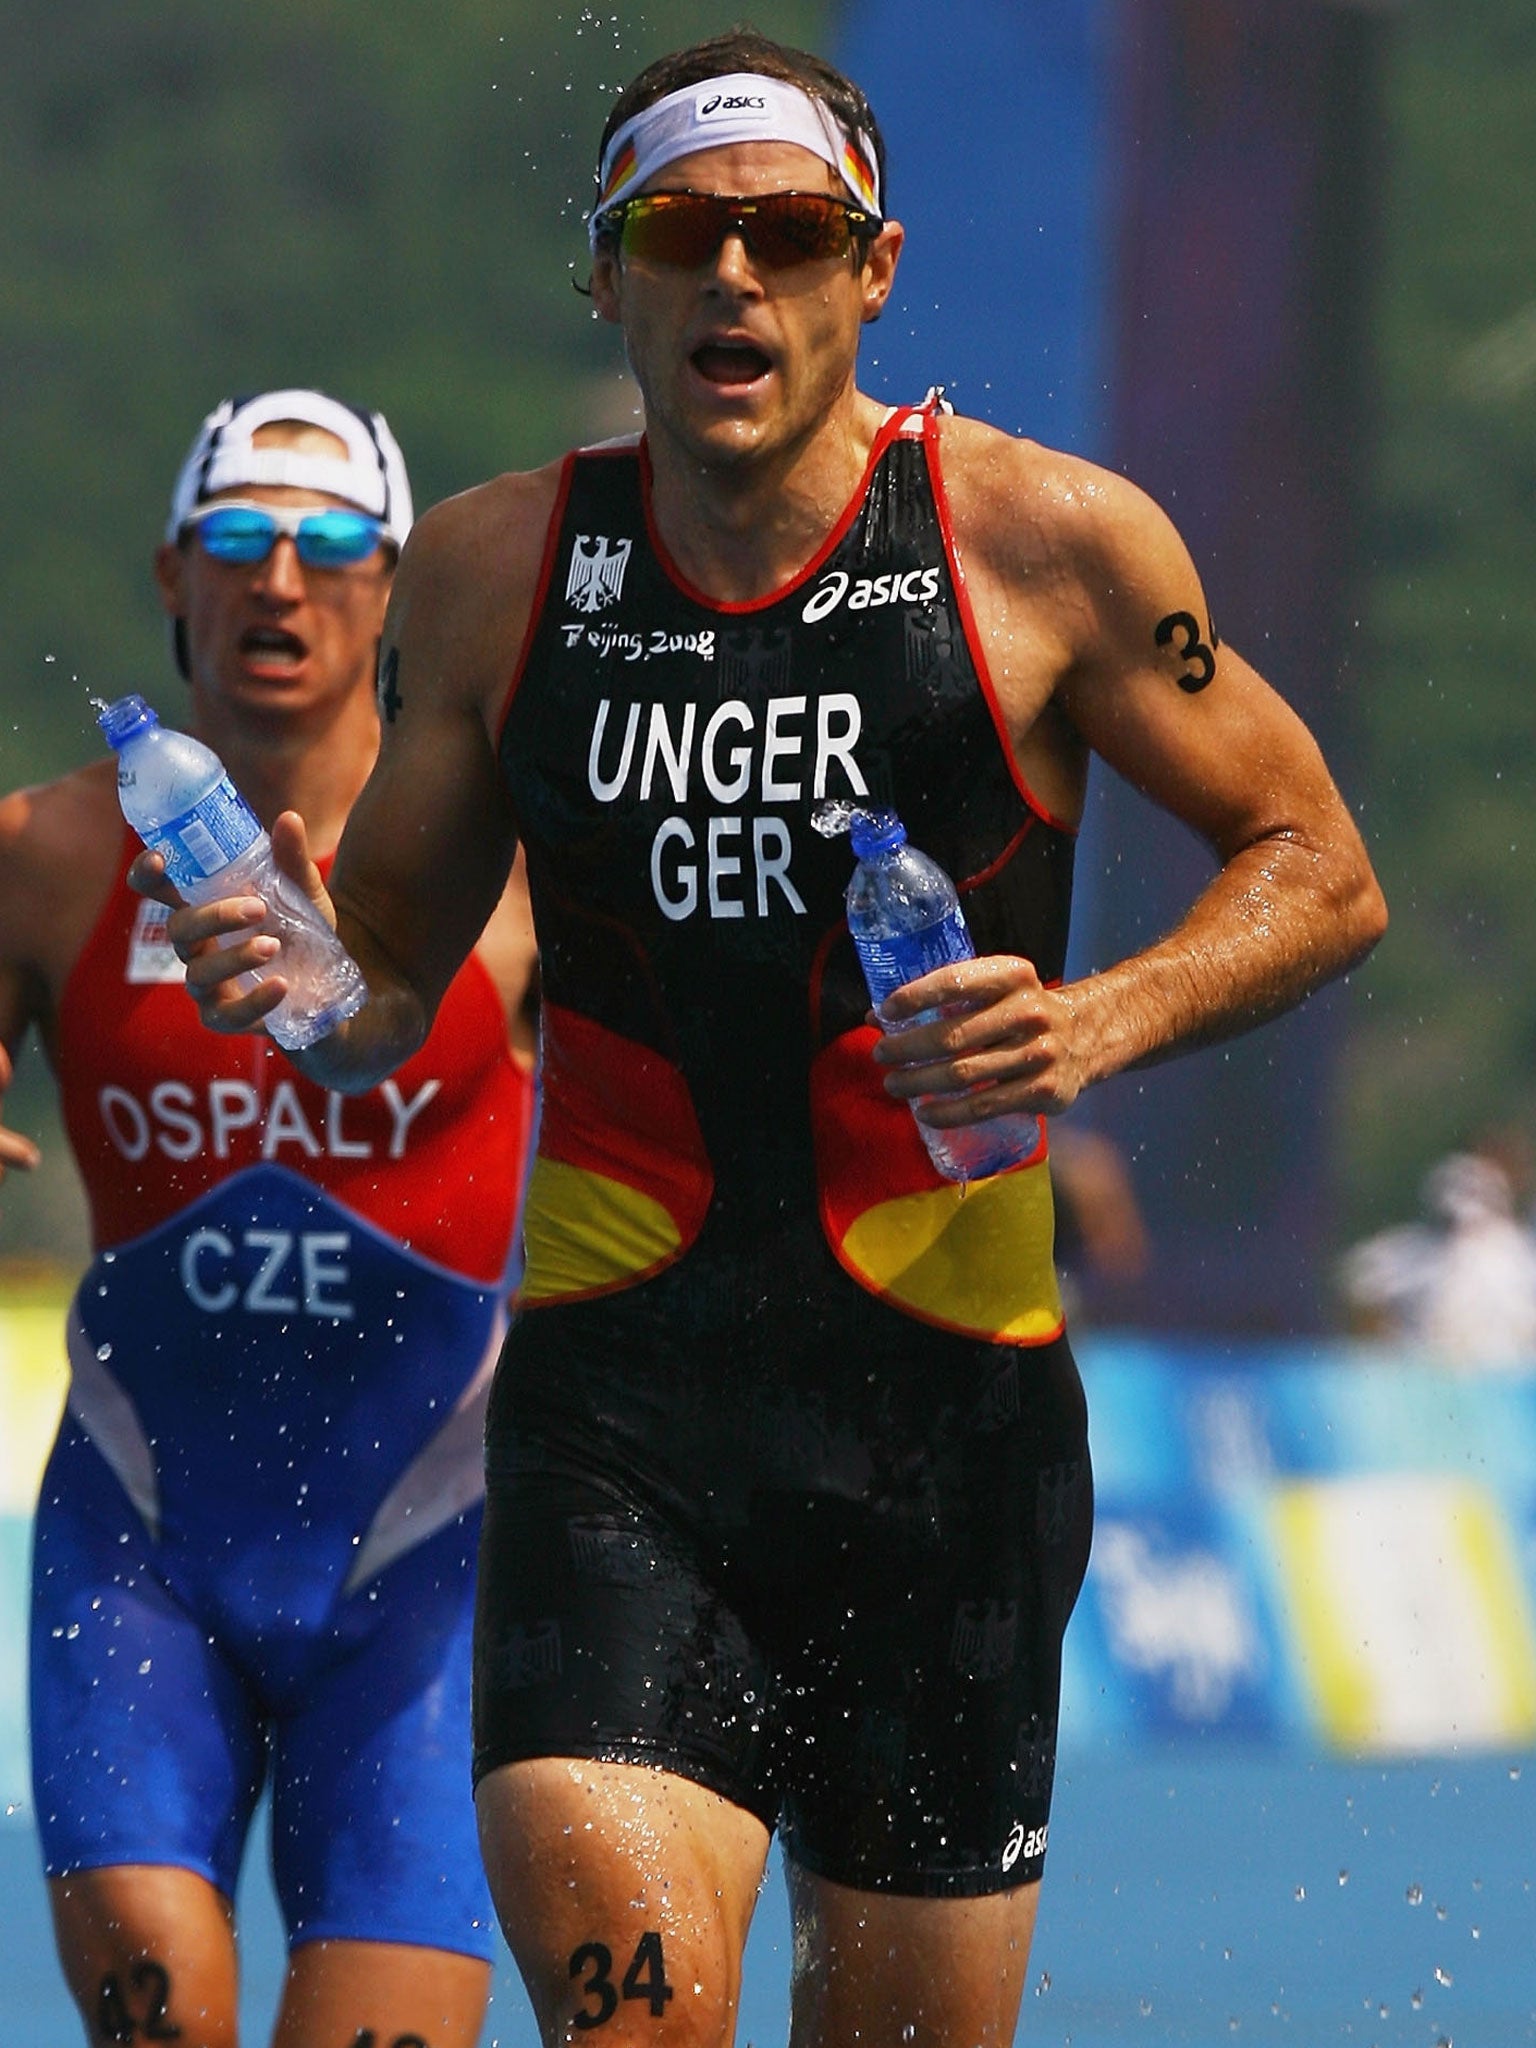 Daniel Unger of Germany competes in the running portion of the Men's Triathlon Final